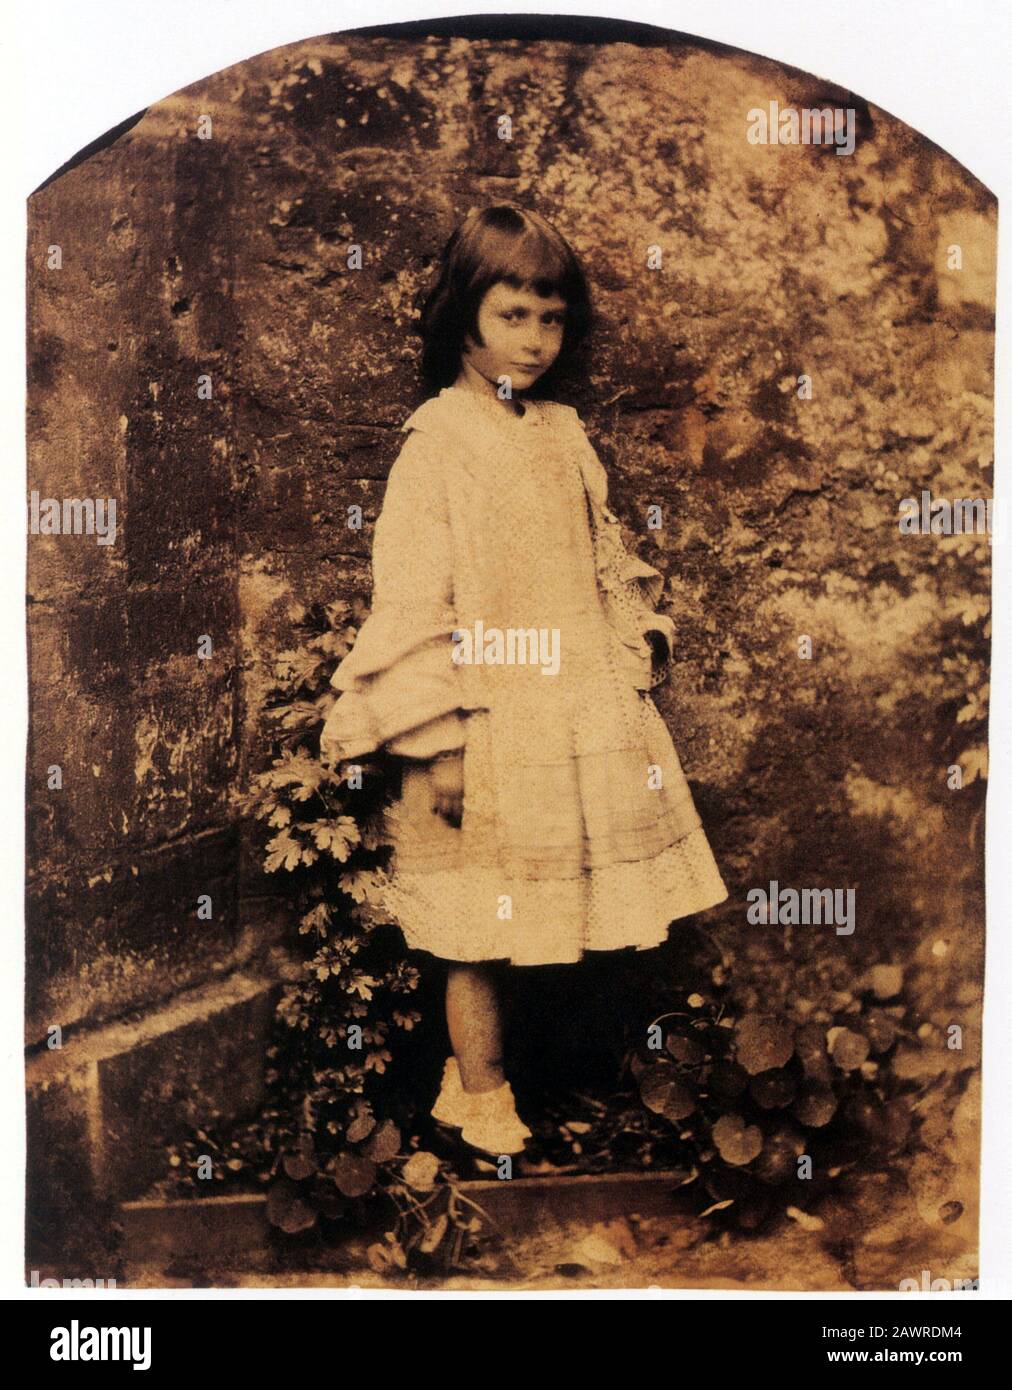 1858 , GREAT BRITAIN  : Alice Liddell ( the little Muse  model for ALICE IN WONDERLAND - 1865  ) portraied by the photographer, mathematician and writ Stock Photo